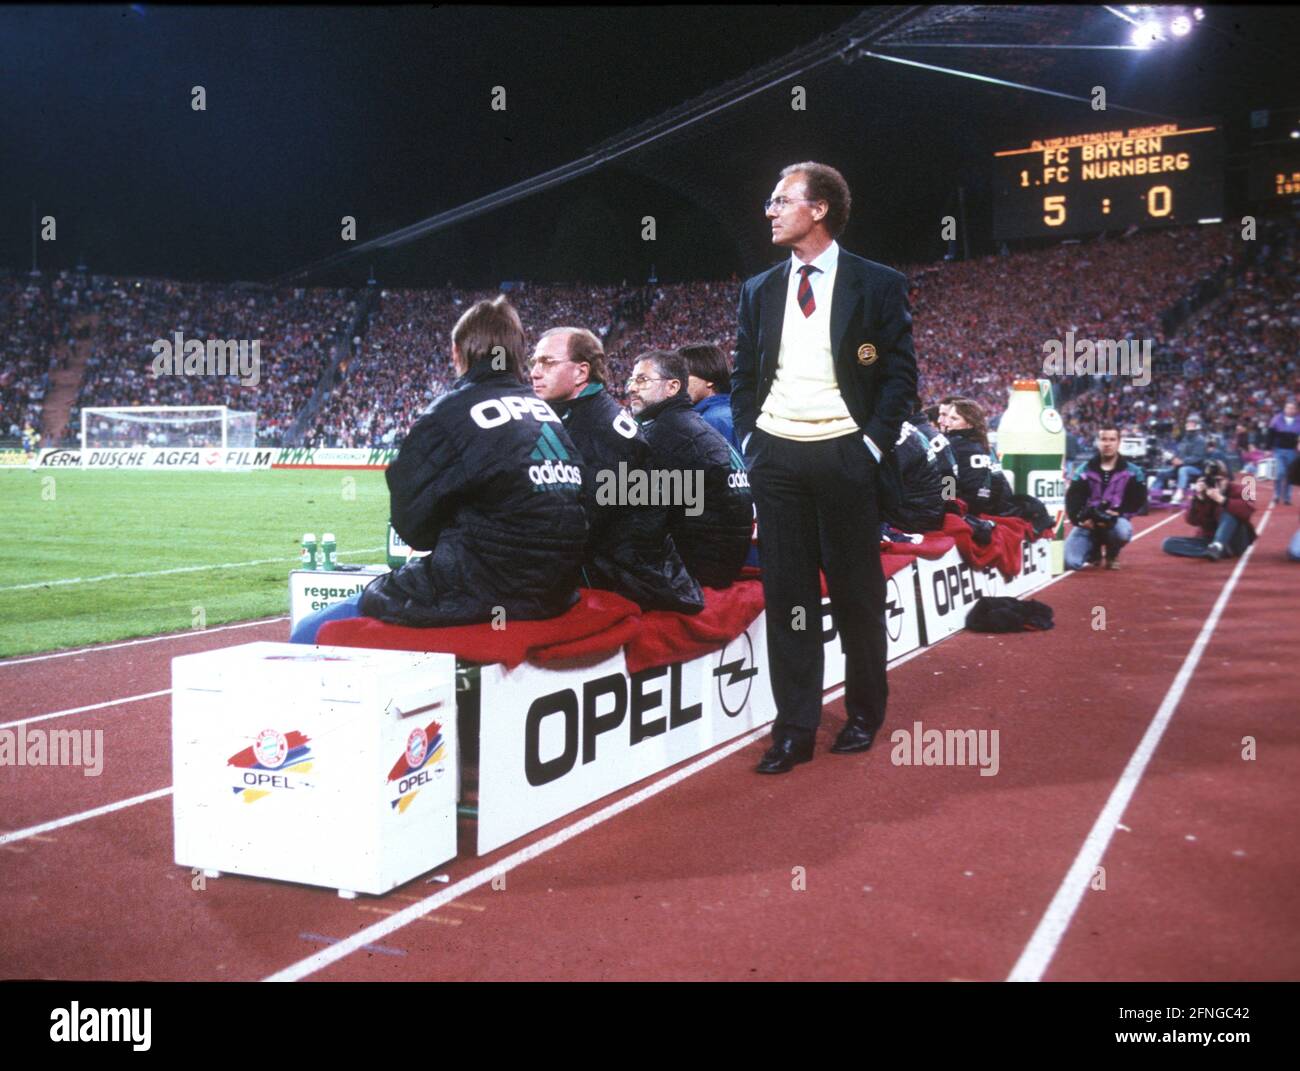 Bayern Munich - 1. FC Nuremberg 5:0 /03.05.1994/ Repeat match Coach Franz Beckenbauer (FC Bayern Munich) stands next to the bench , behind the scoreboard with the final result. [automated translation] Stock Photo